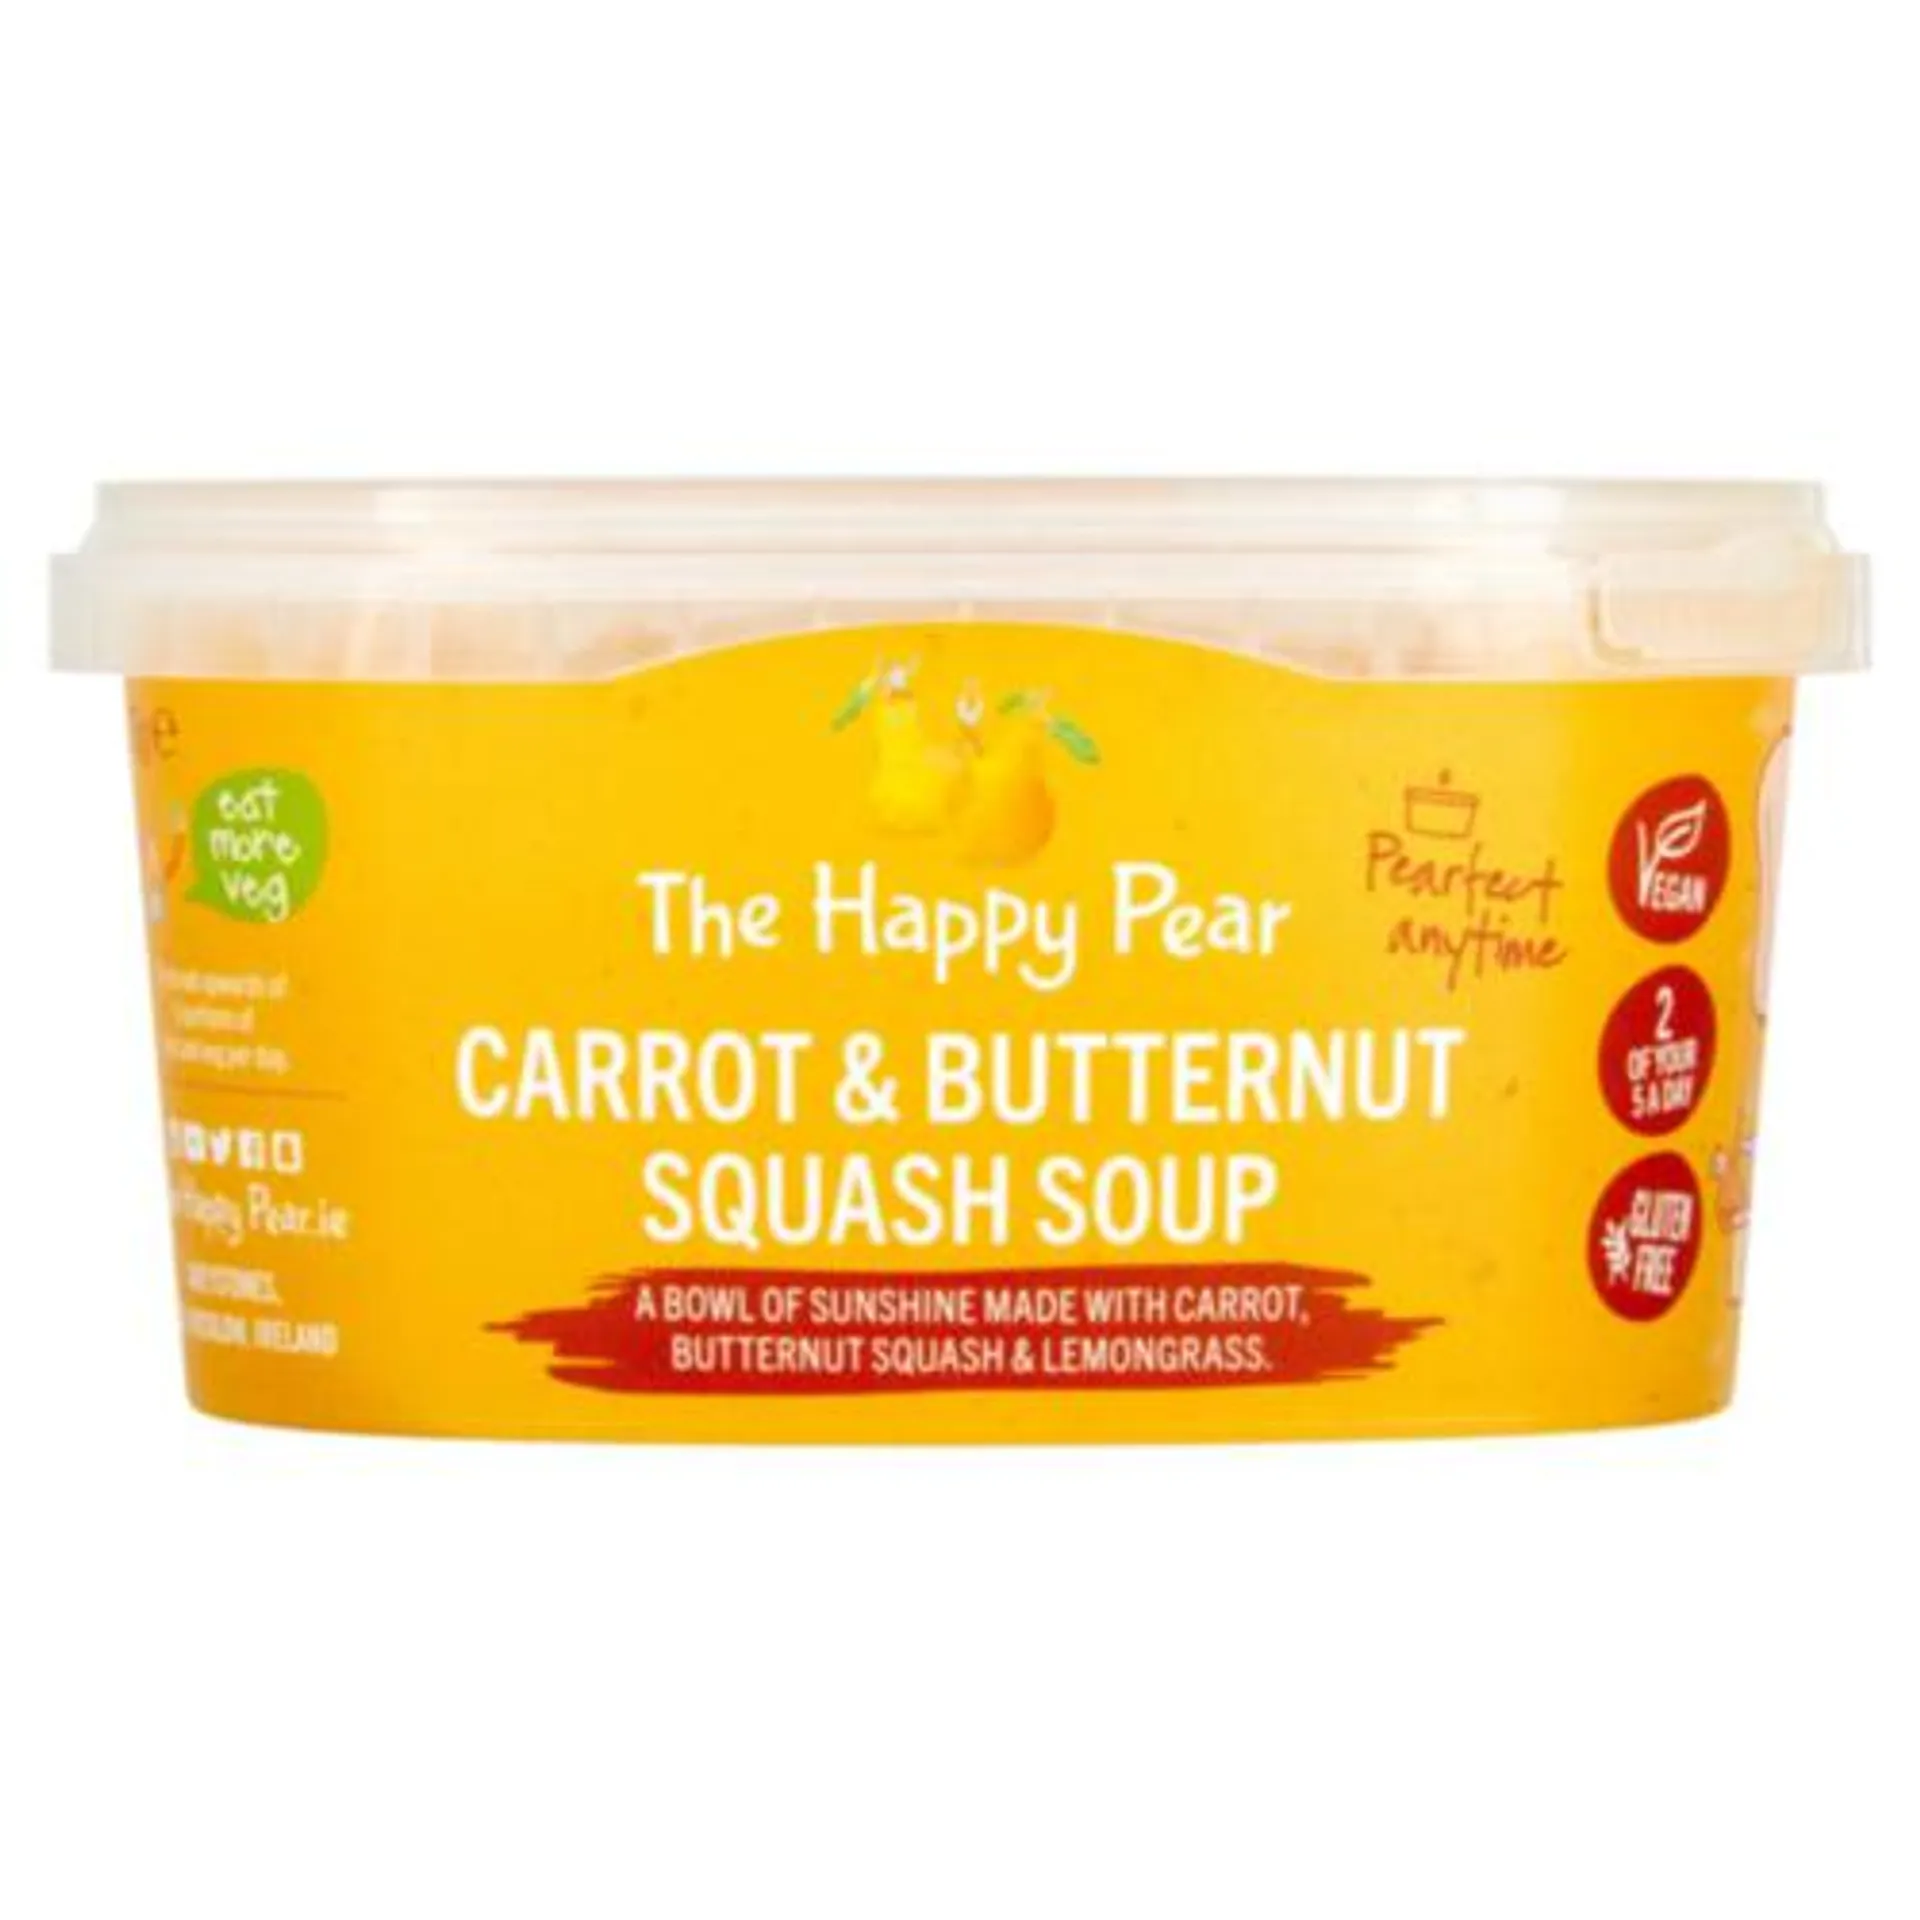 The Happy Pear Carrot & Butternut Squash Soup